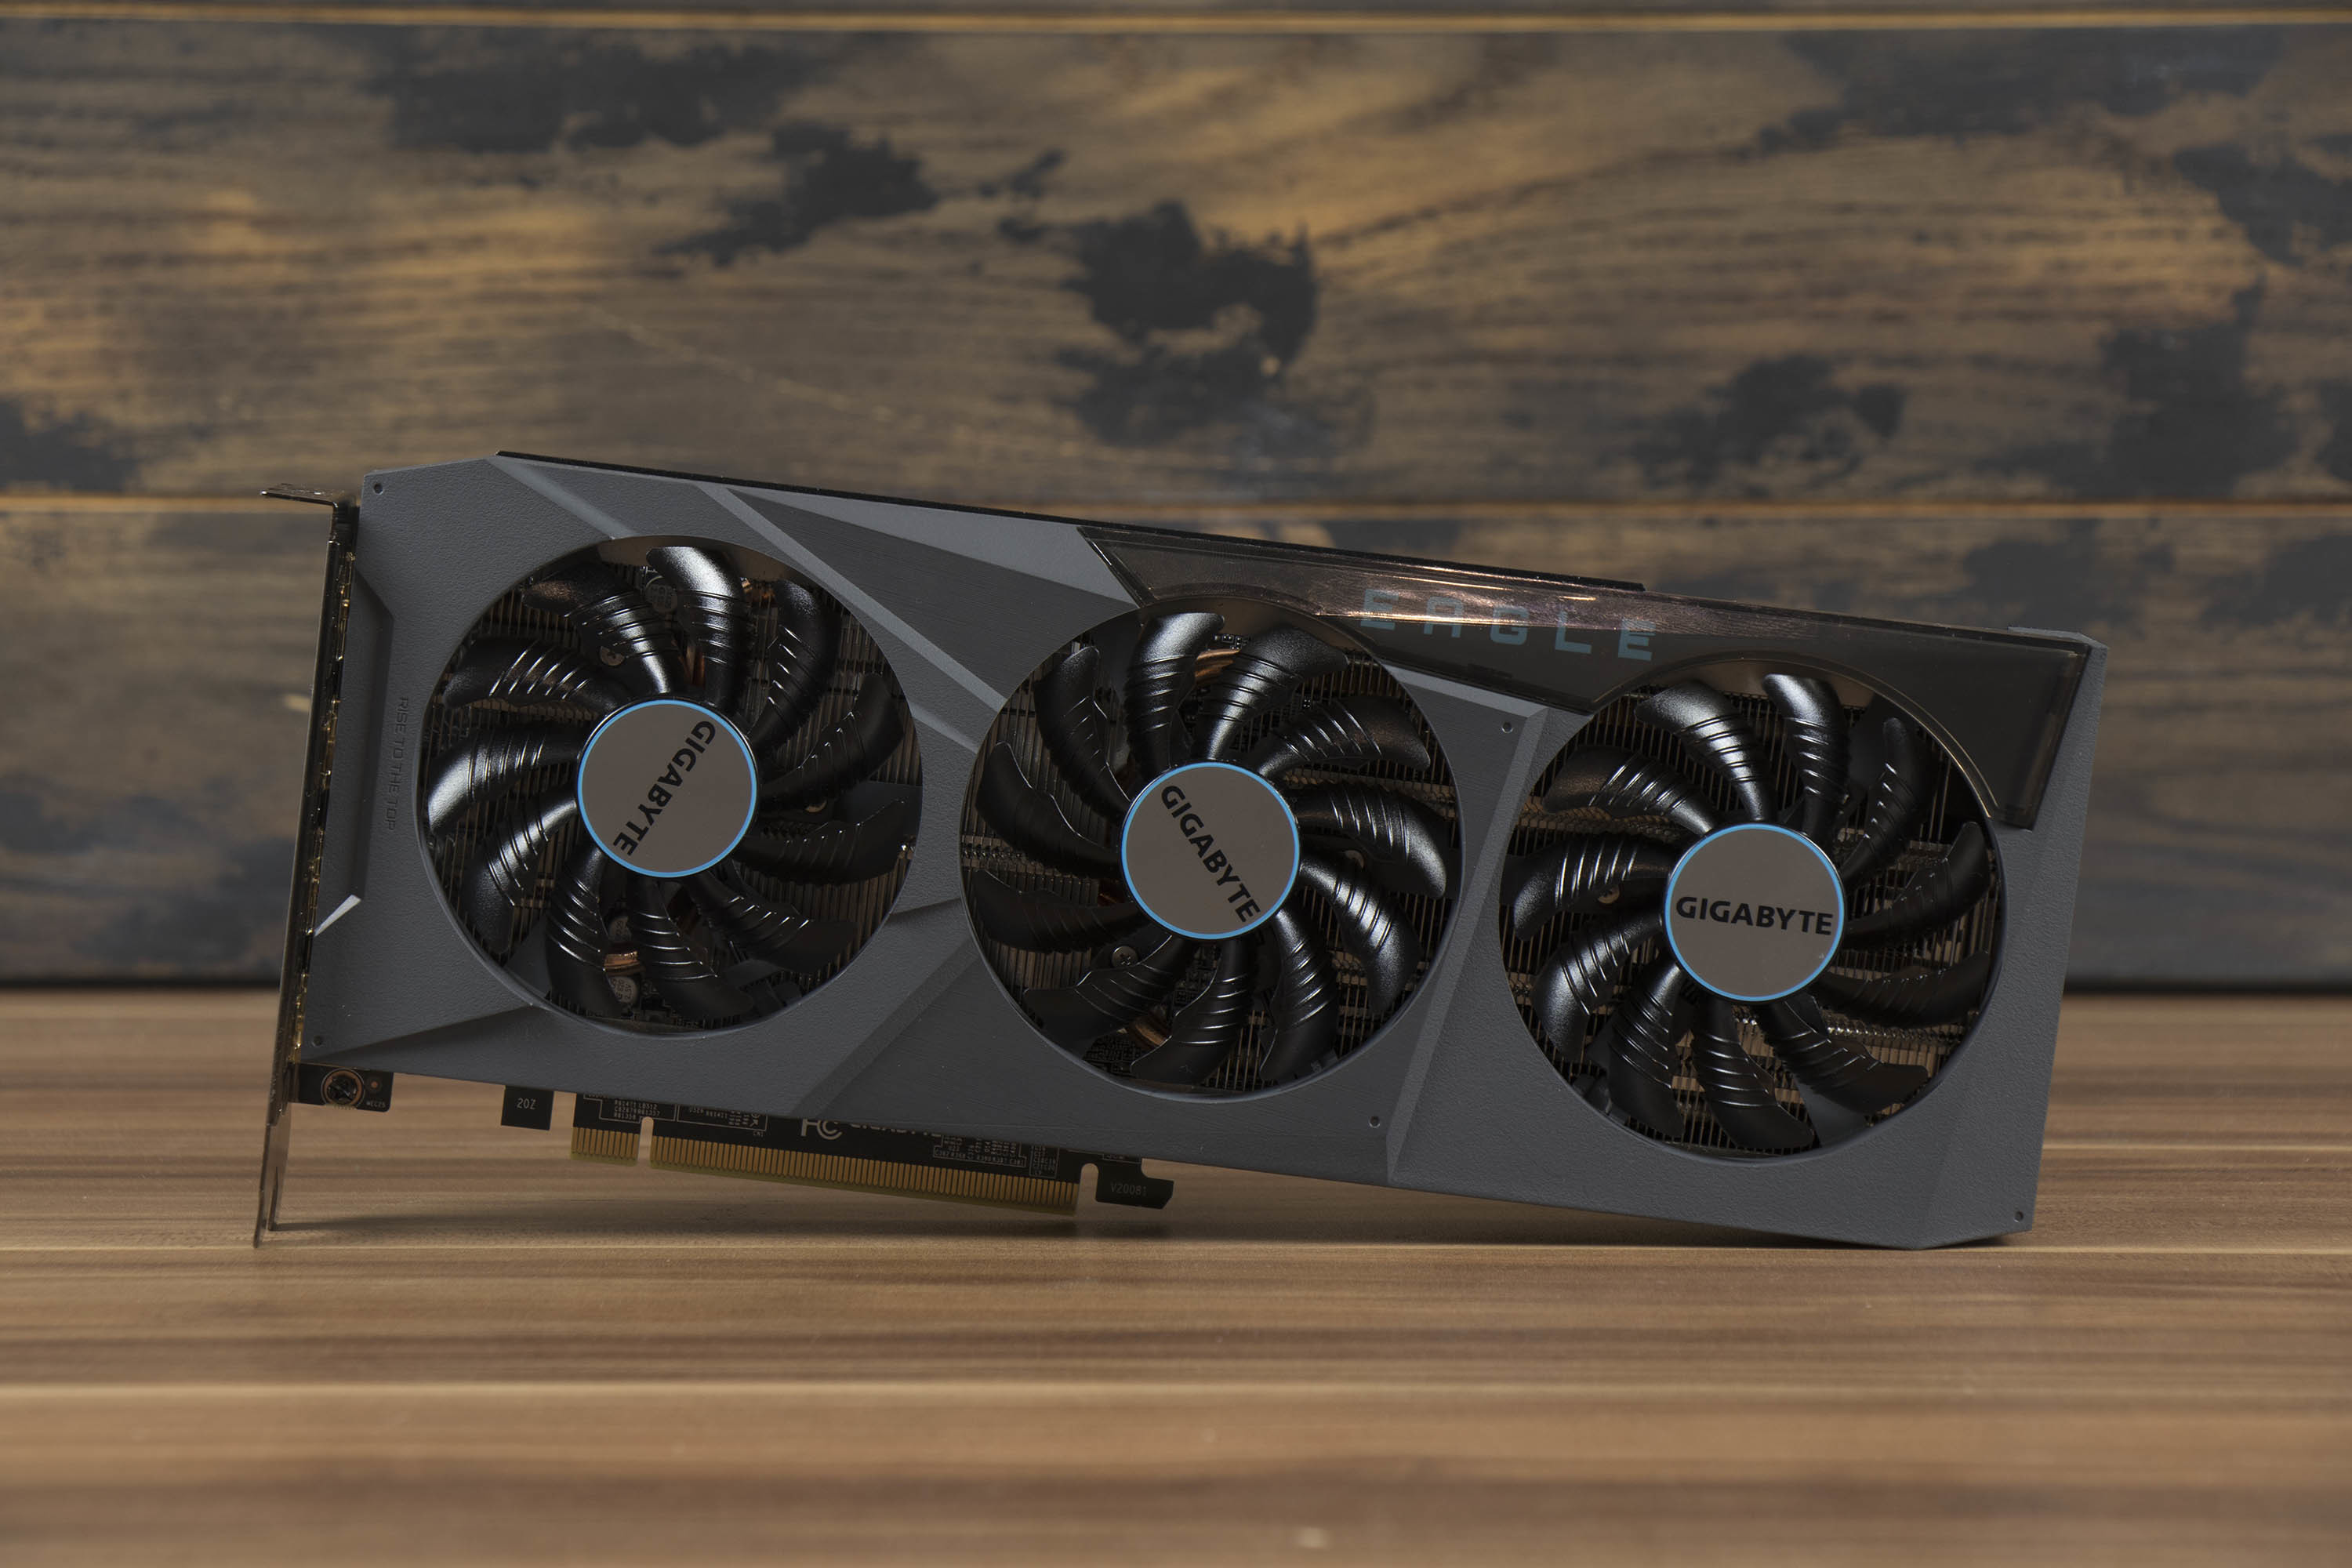 Latest NVIDIA Technologies at Affordable Price: GIGABYTE GeForce RTX